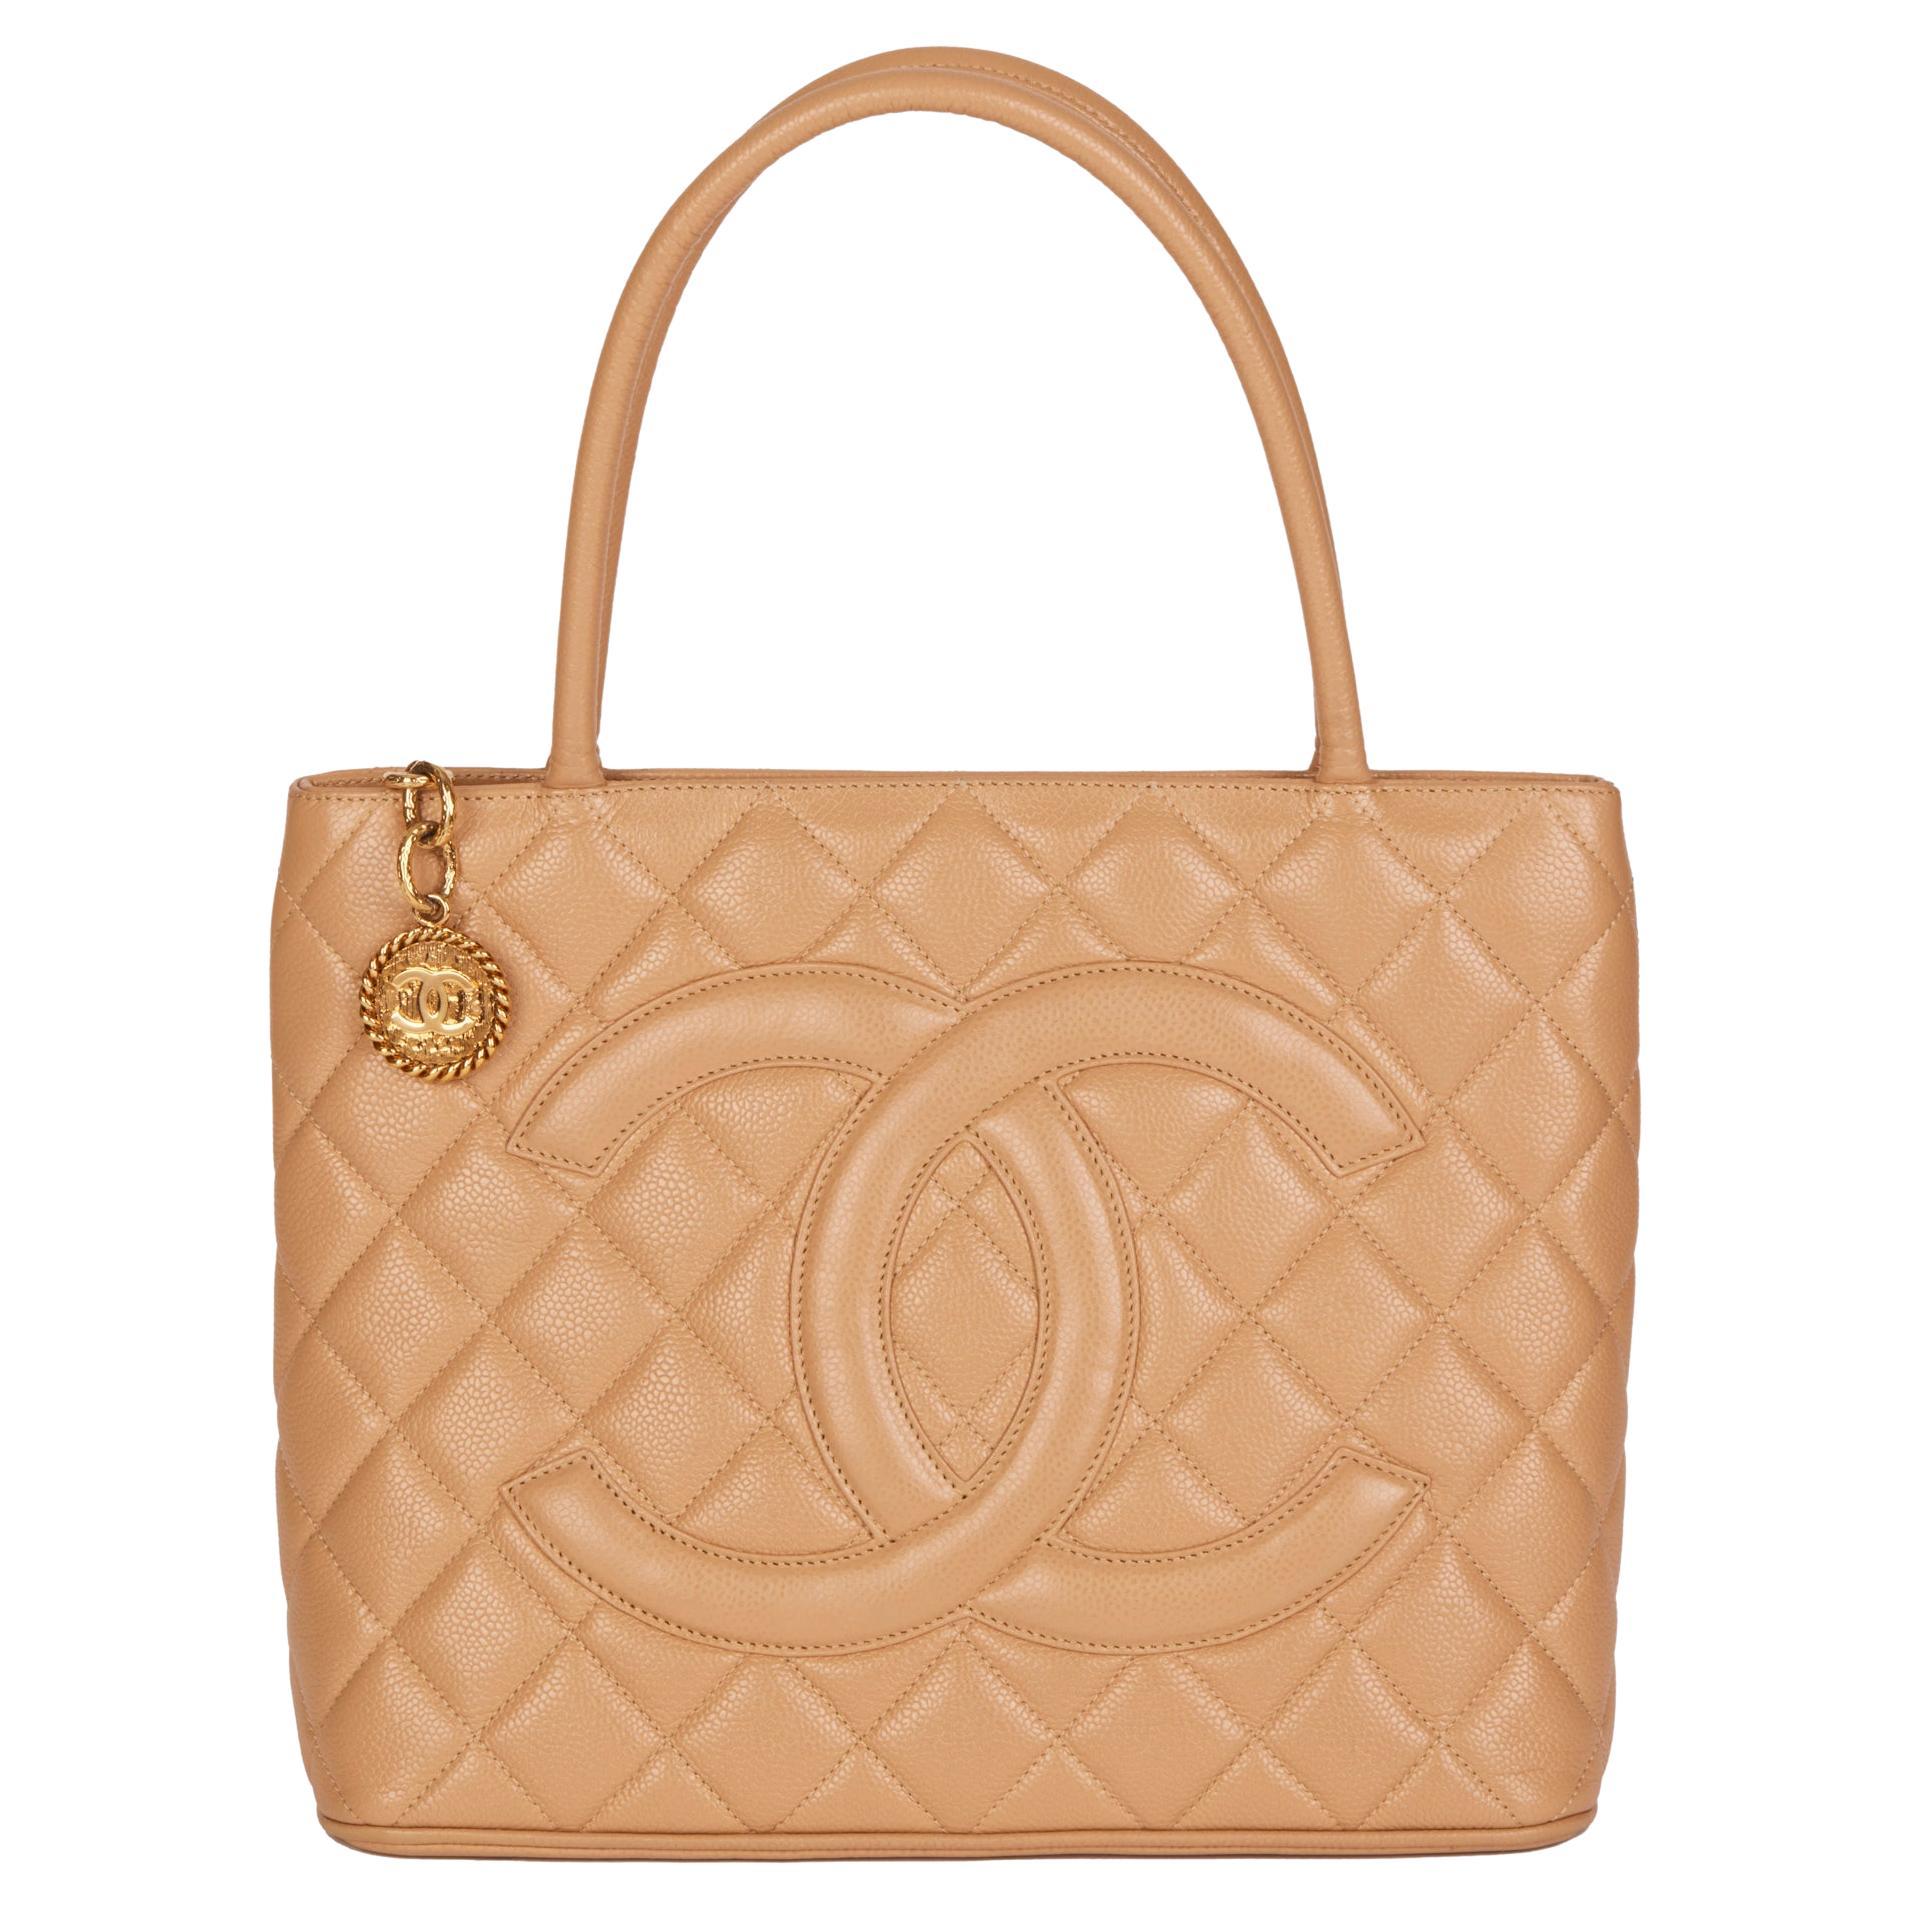 CHANEL Beige Quilted Caviar Leather Vintage Medallion Tote